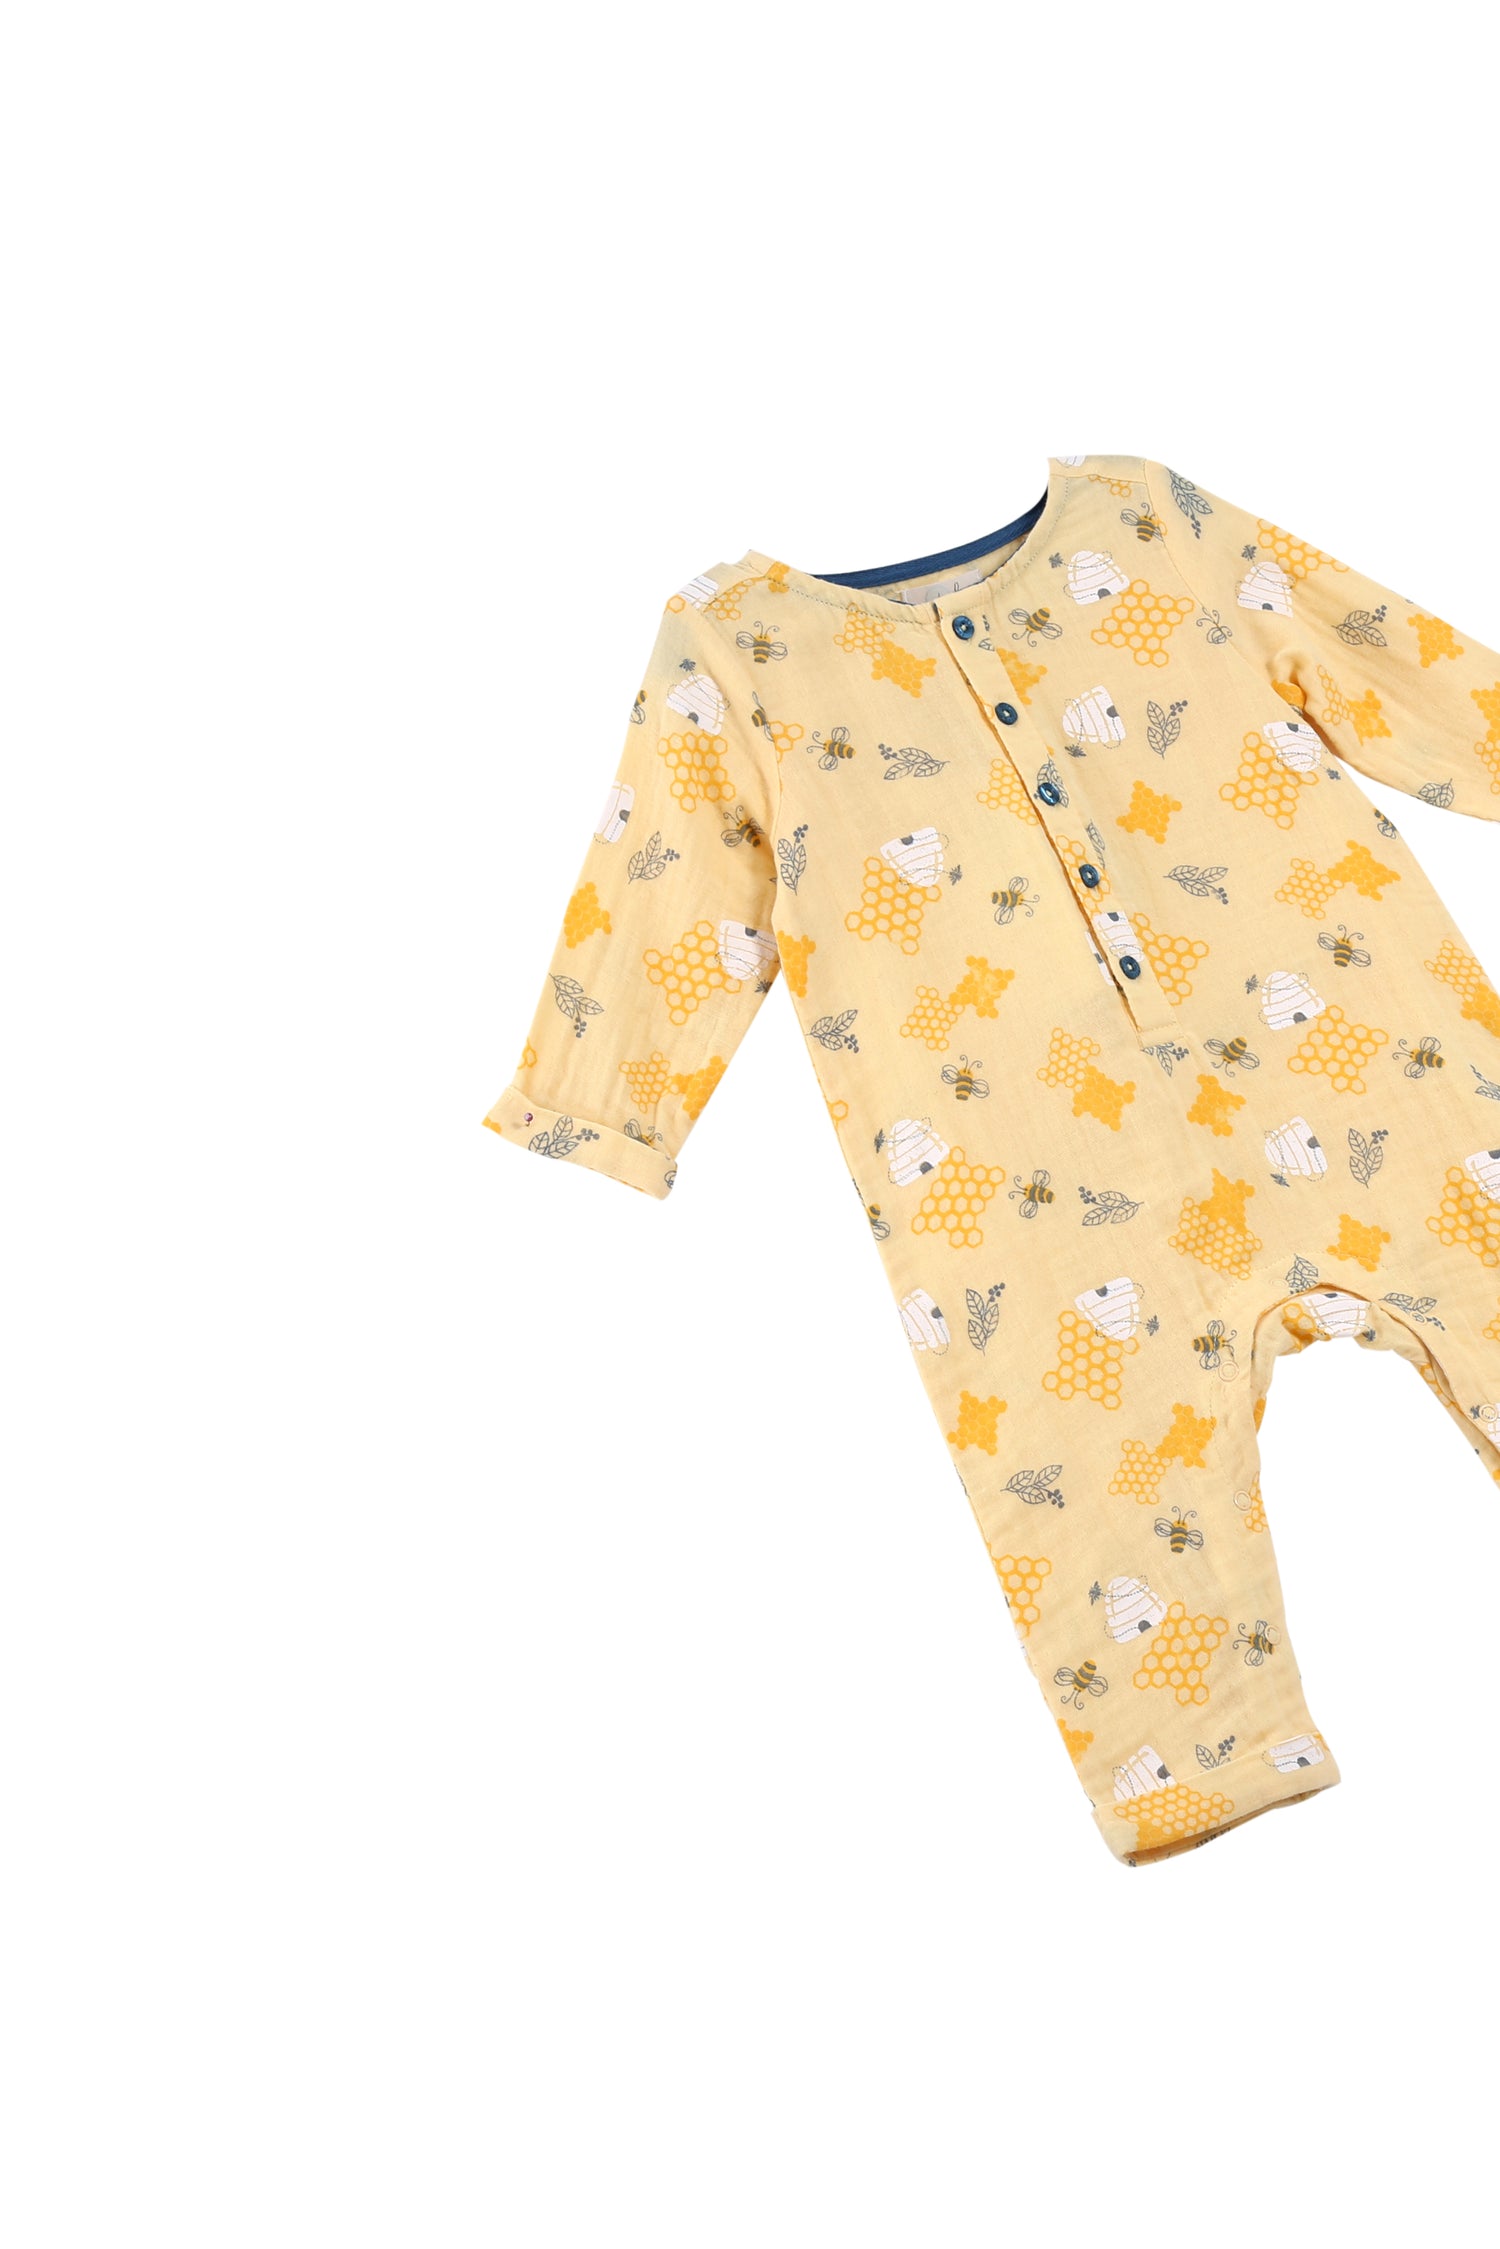 CLOSE UP OF YELLOW BEE HIVE LONG-SLEEVE COVERALL